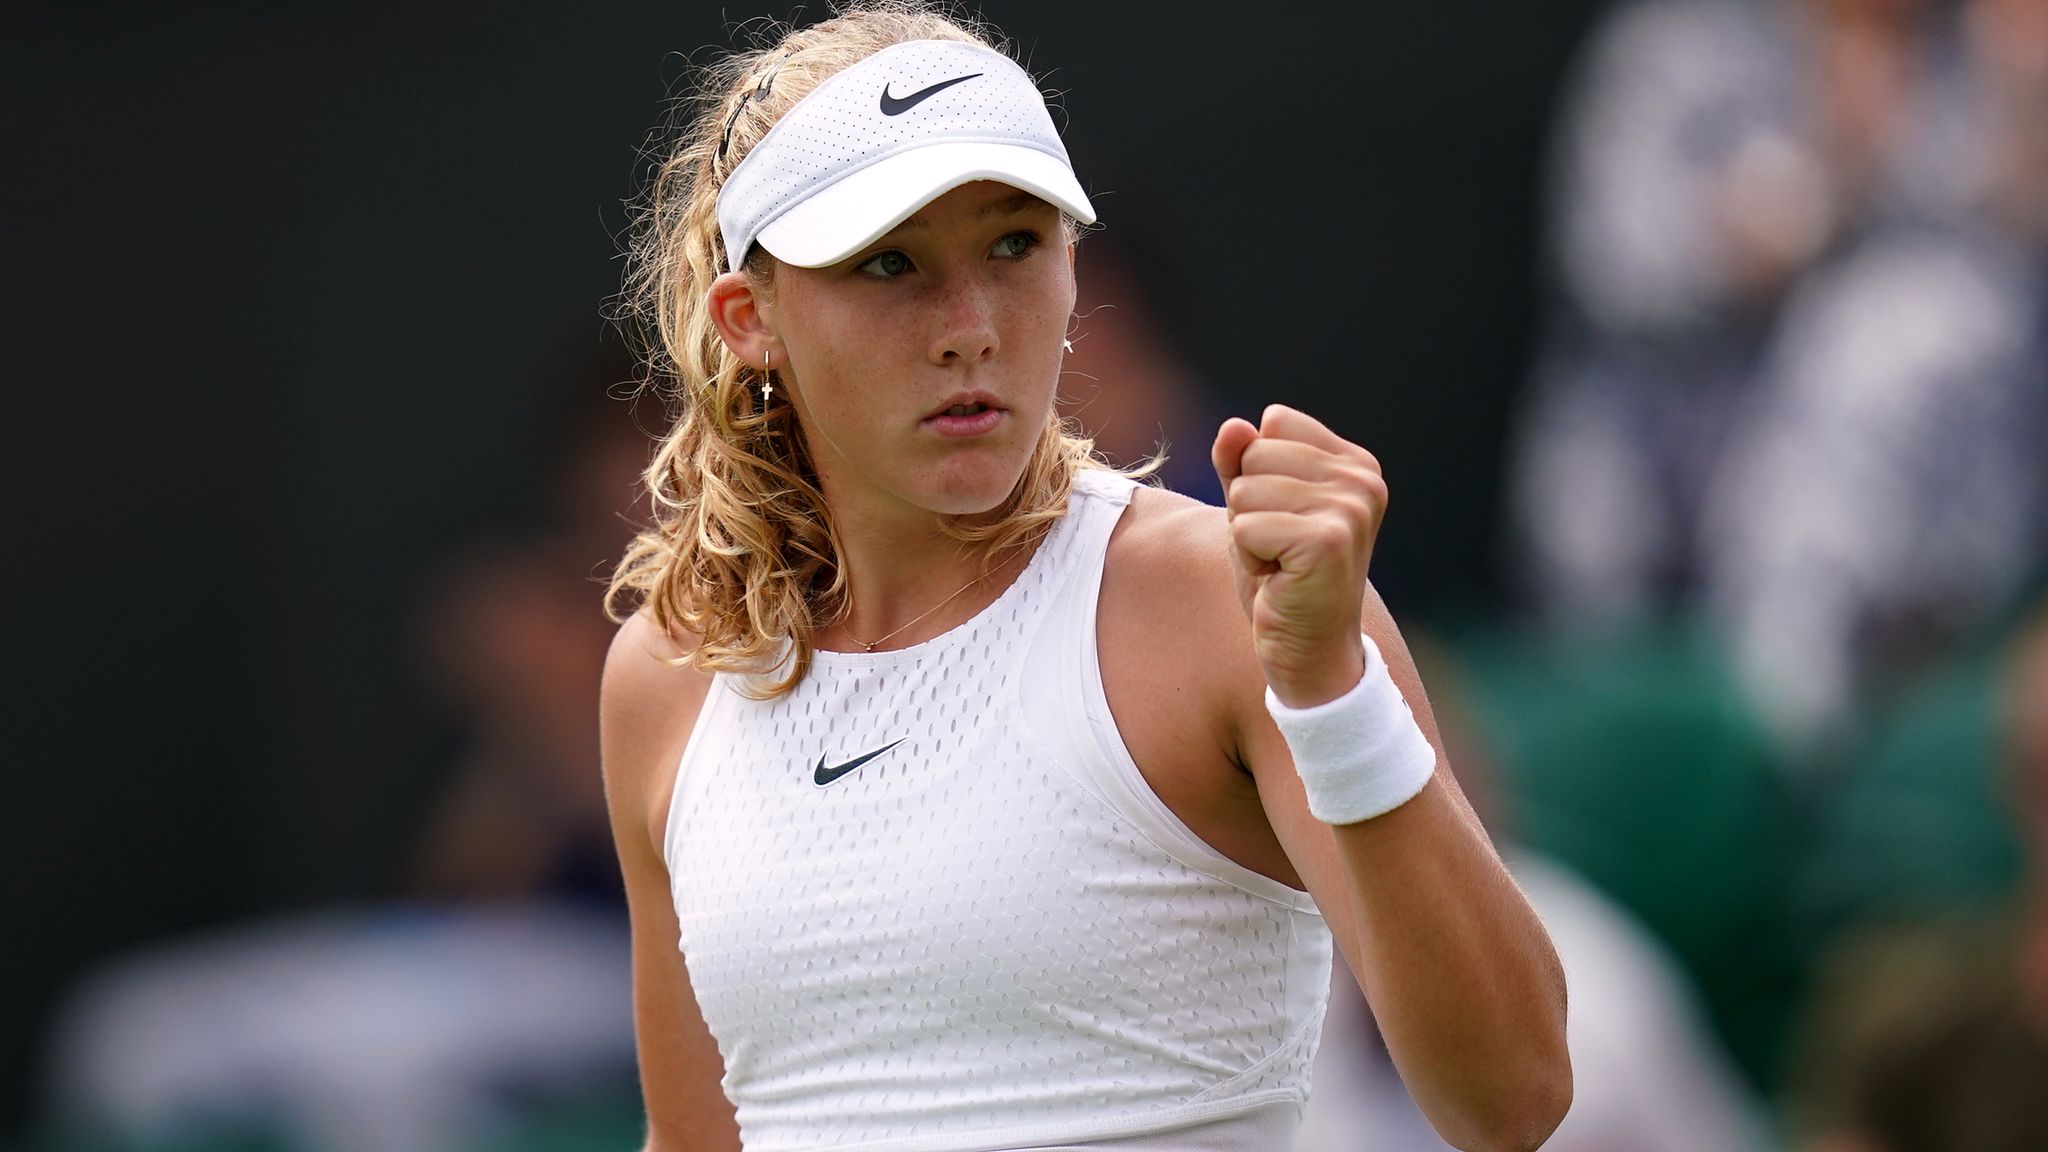 Wimbledon Teenager Mirra Andreeva continues her dream run by reaching